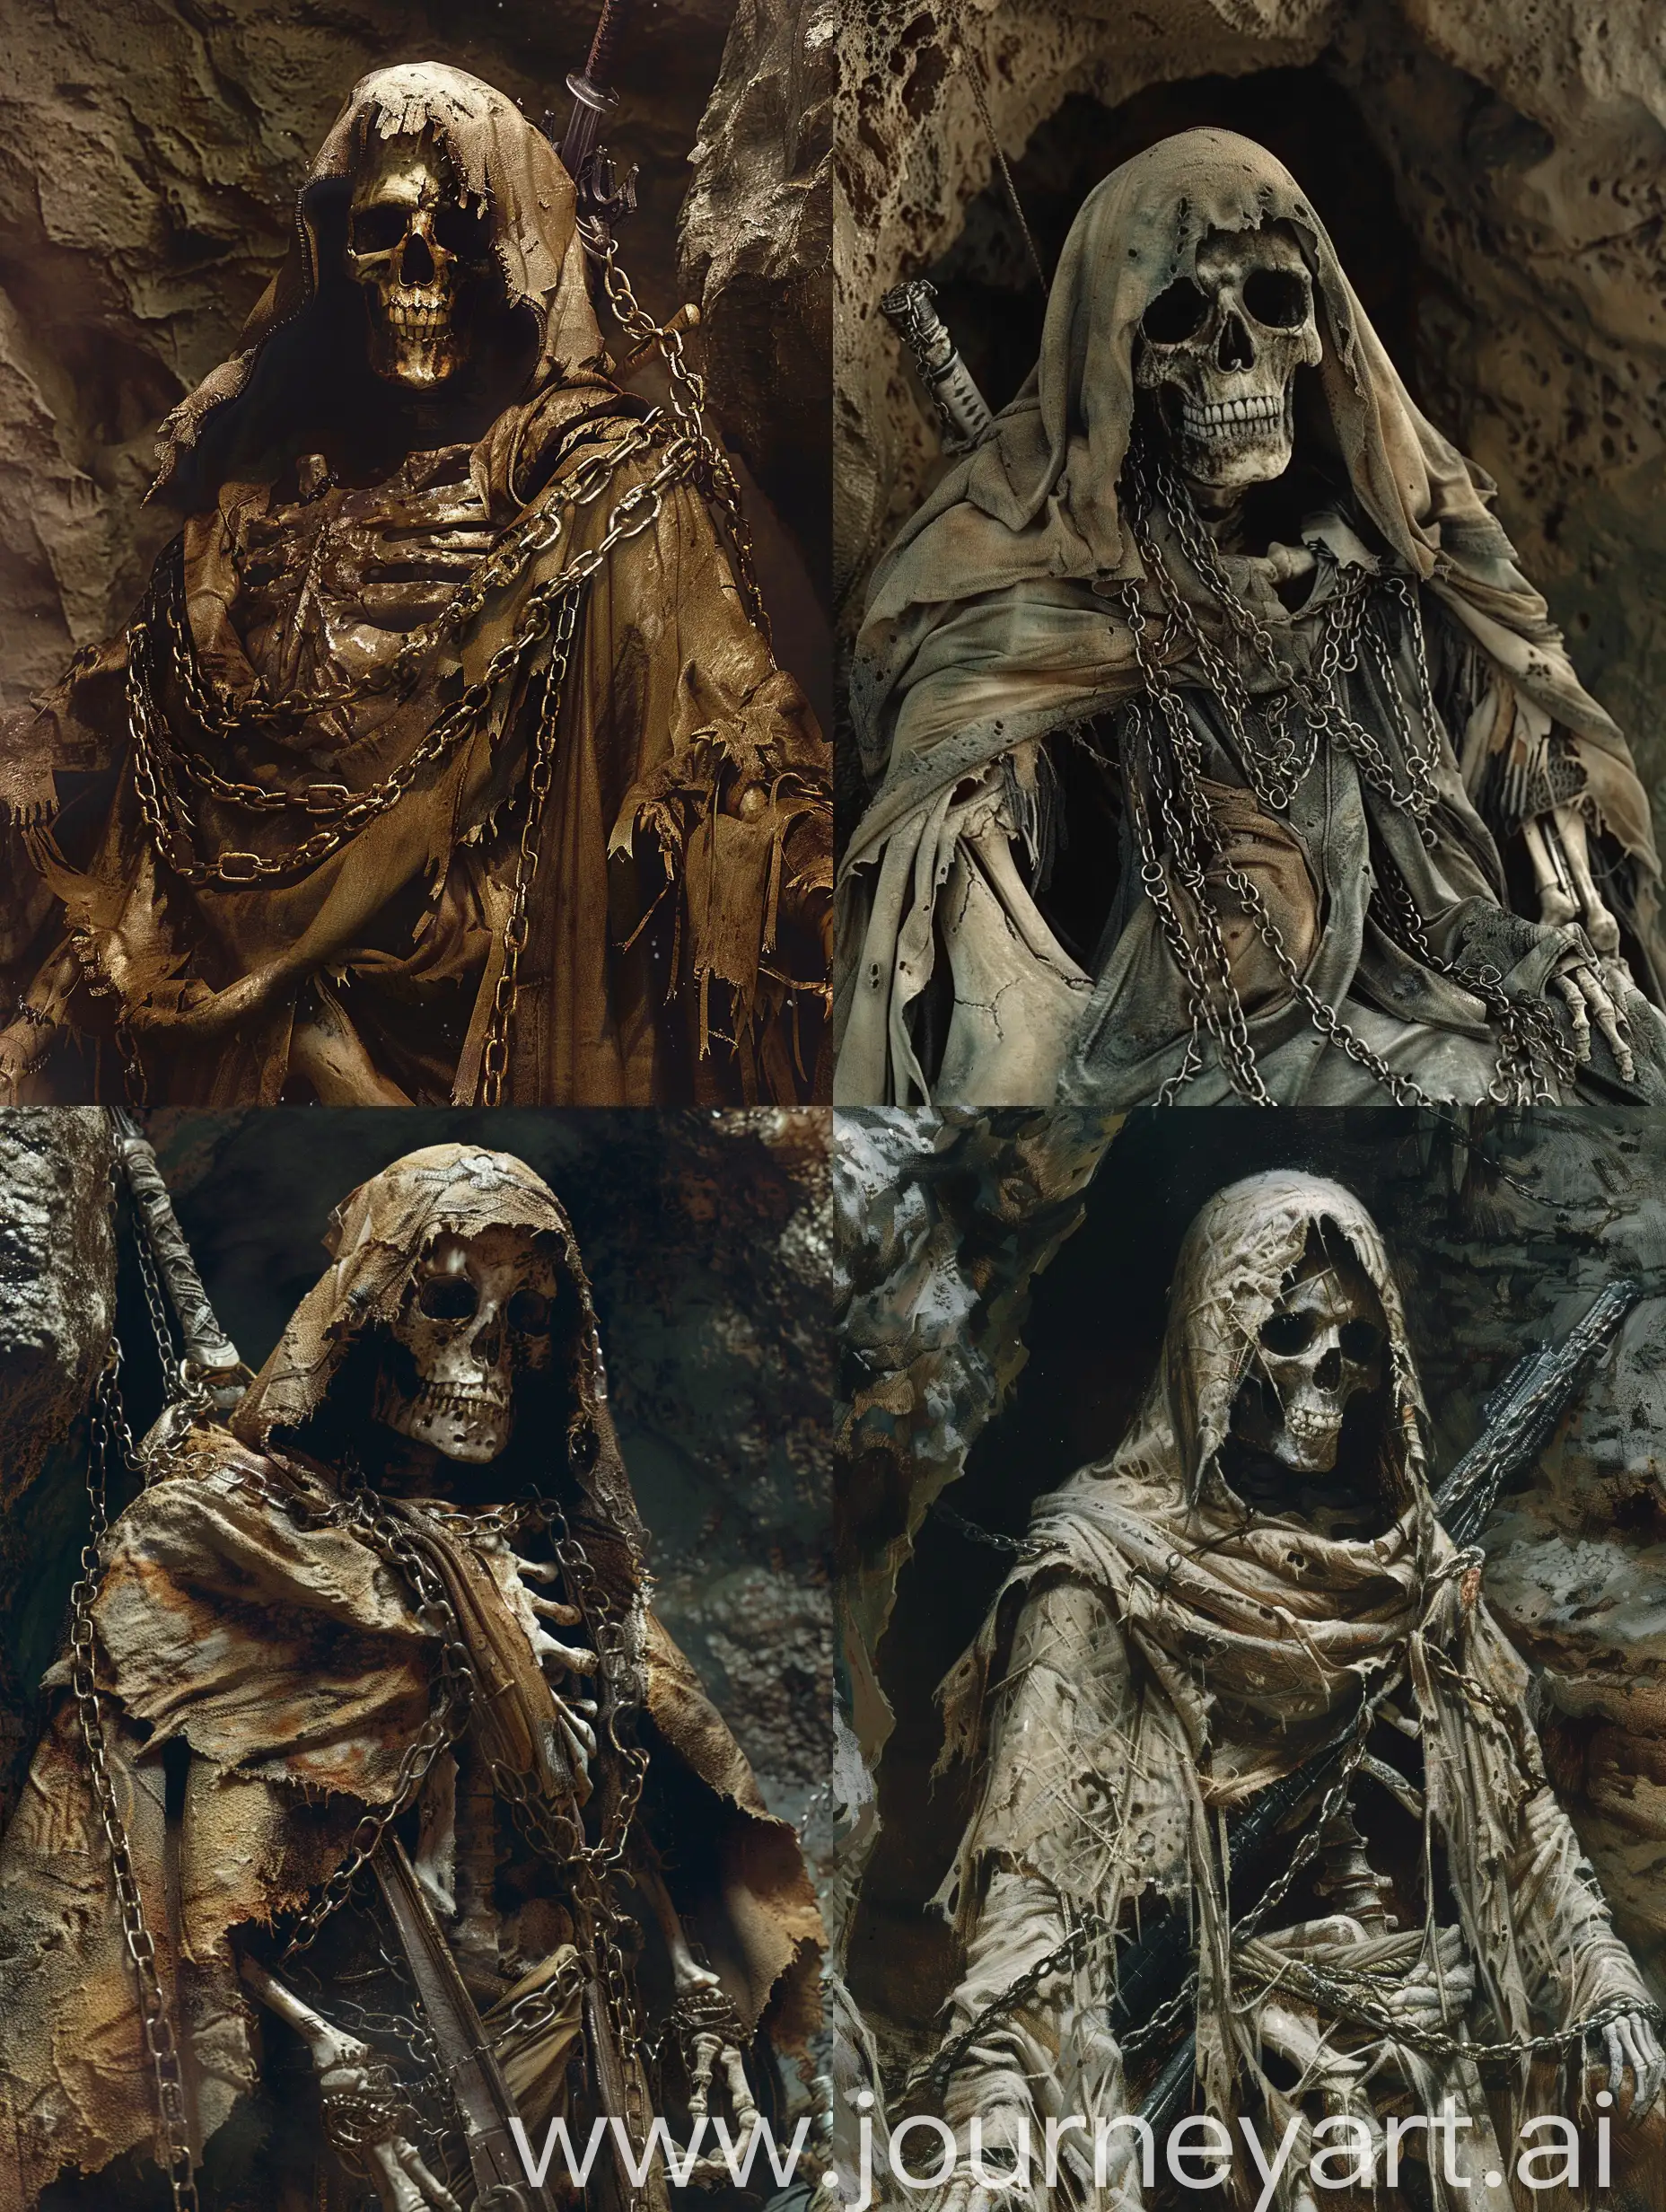 Skeleton warrior [ The central subject is a skeletal being draped in tattered robes and armor. The figure wears a hooded cloak, obscuring most of its skull-like face. Only the empty eye sockets and an open mouth are visible. The robes are worn and torn, suggesting age or neglect. Chains are wrapped around its body, adding to the eerie ambiance.]with robe and hood,naginata on the back , in a cave-like place underground Imprisoned in solitary confinement , horror place , incredible detail,terrifying, imaginary image,fantasy.